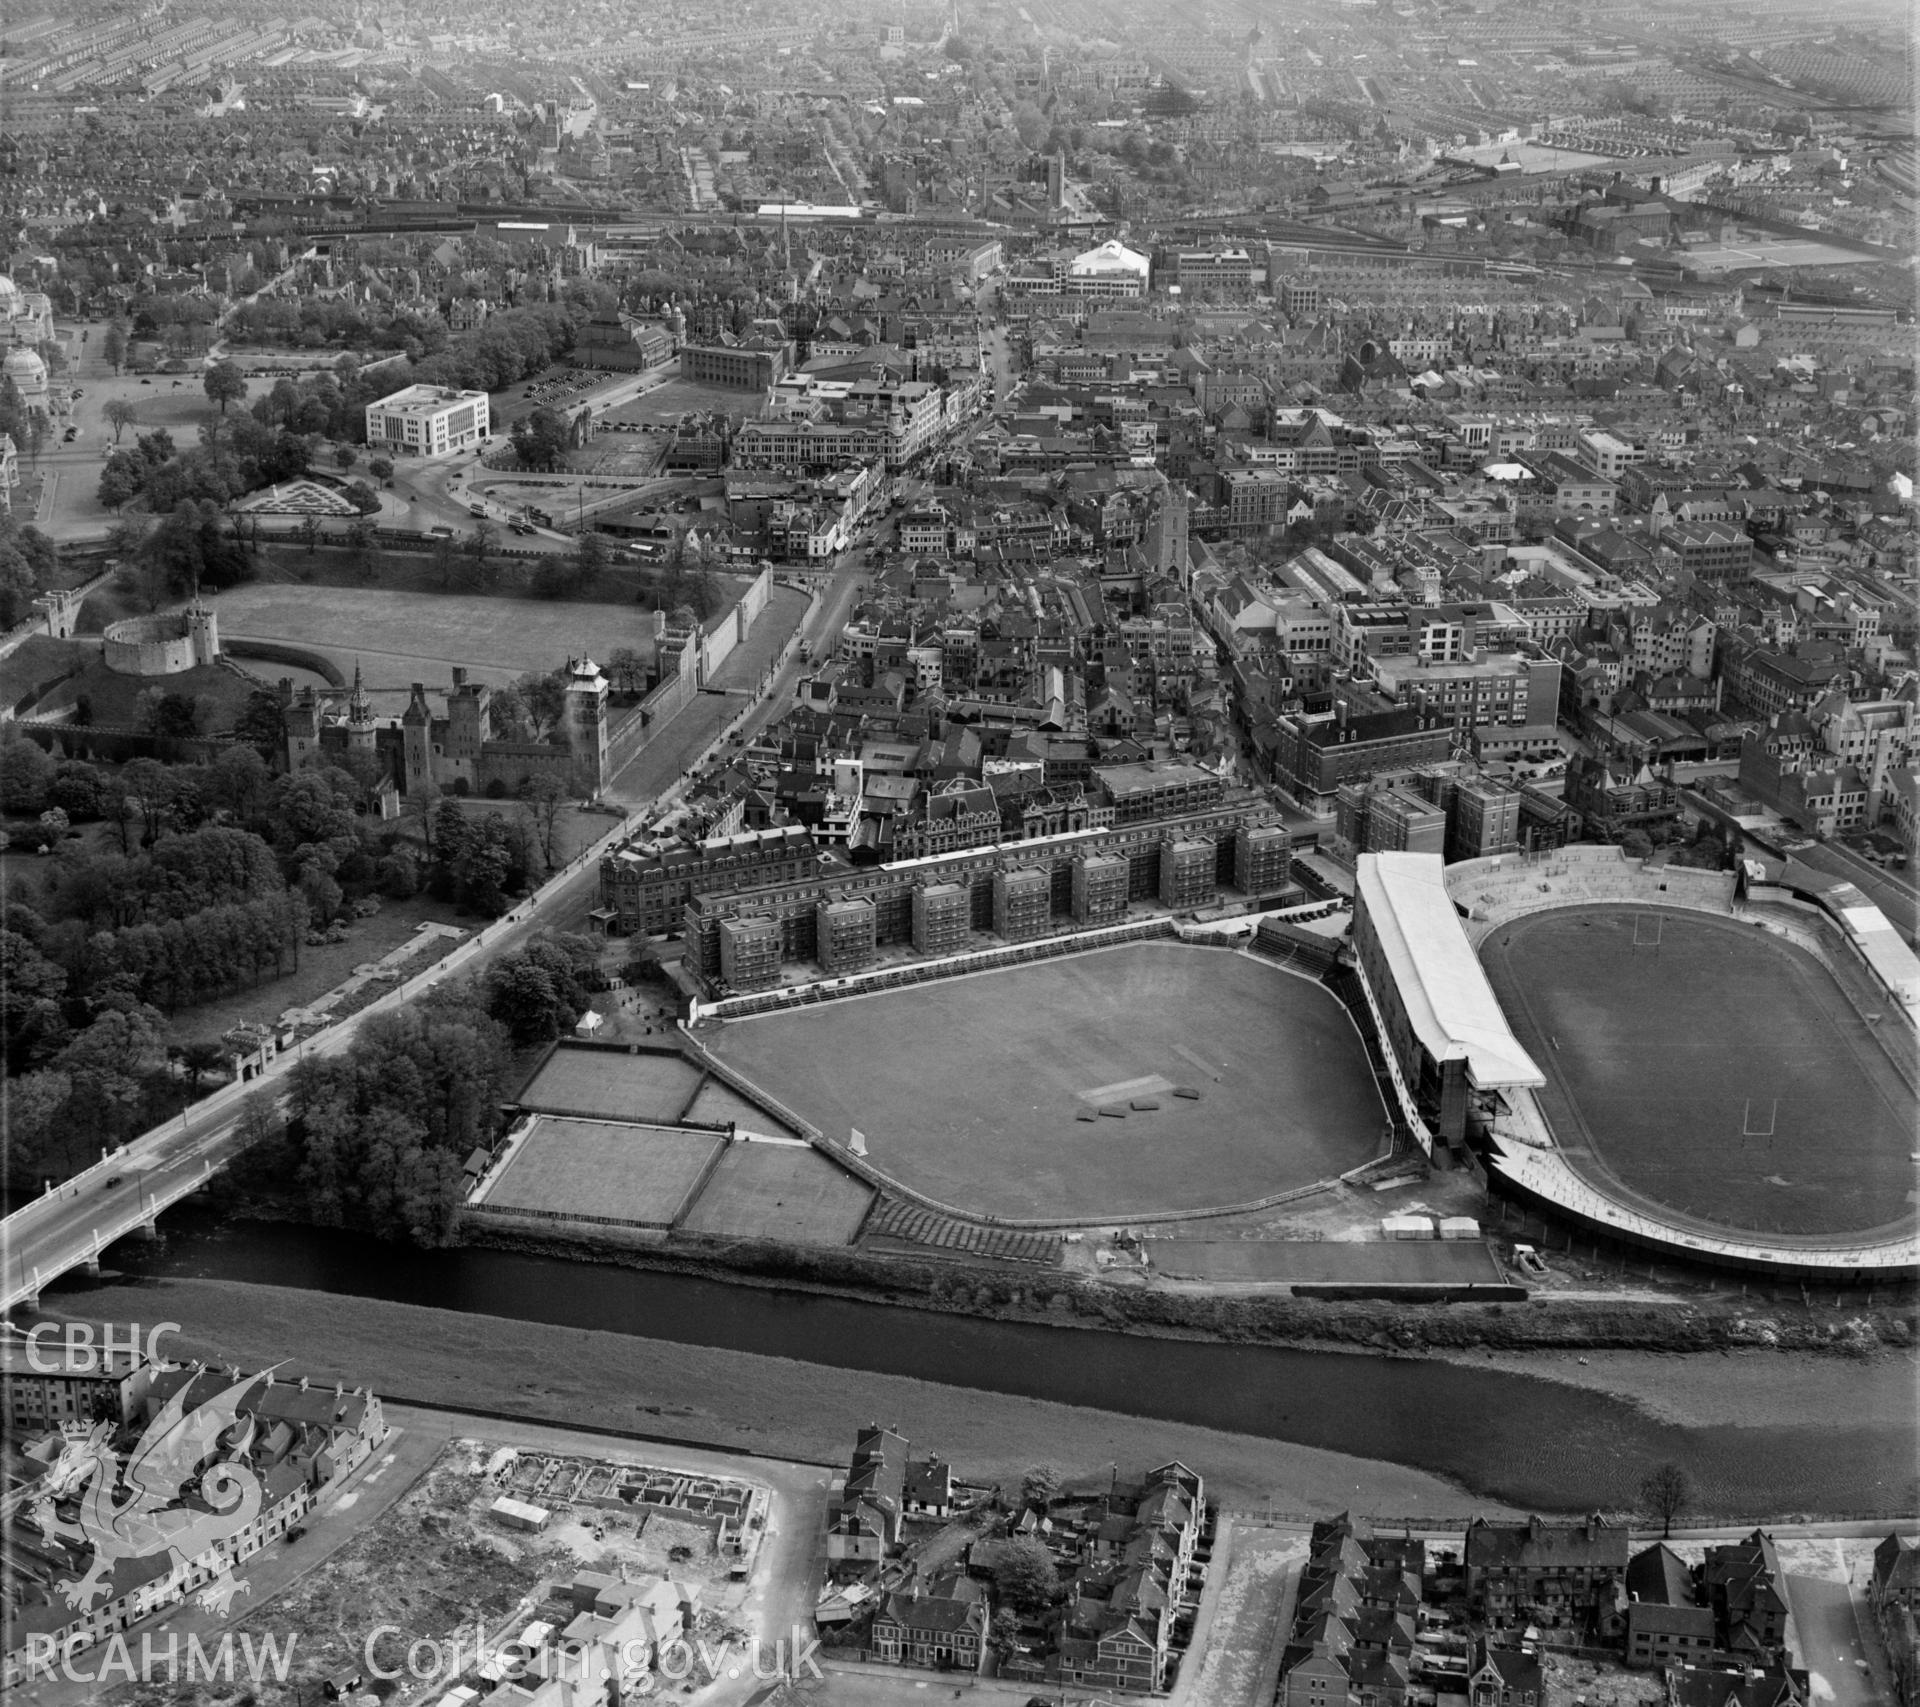 View of Cardiff showing the Arms Park rugby & cricket grounds